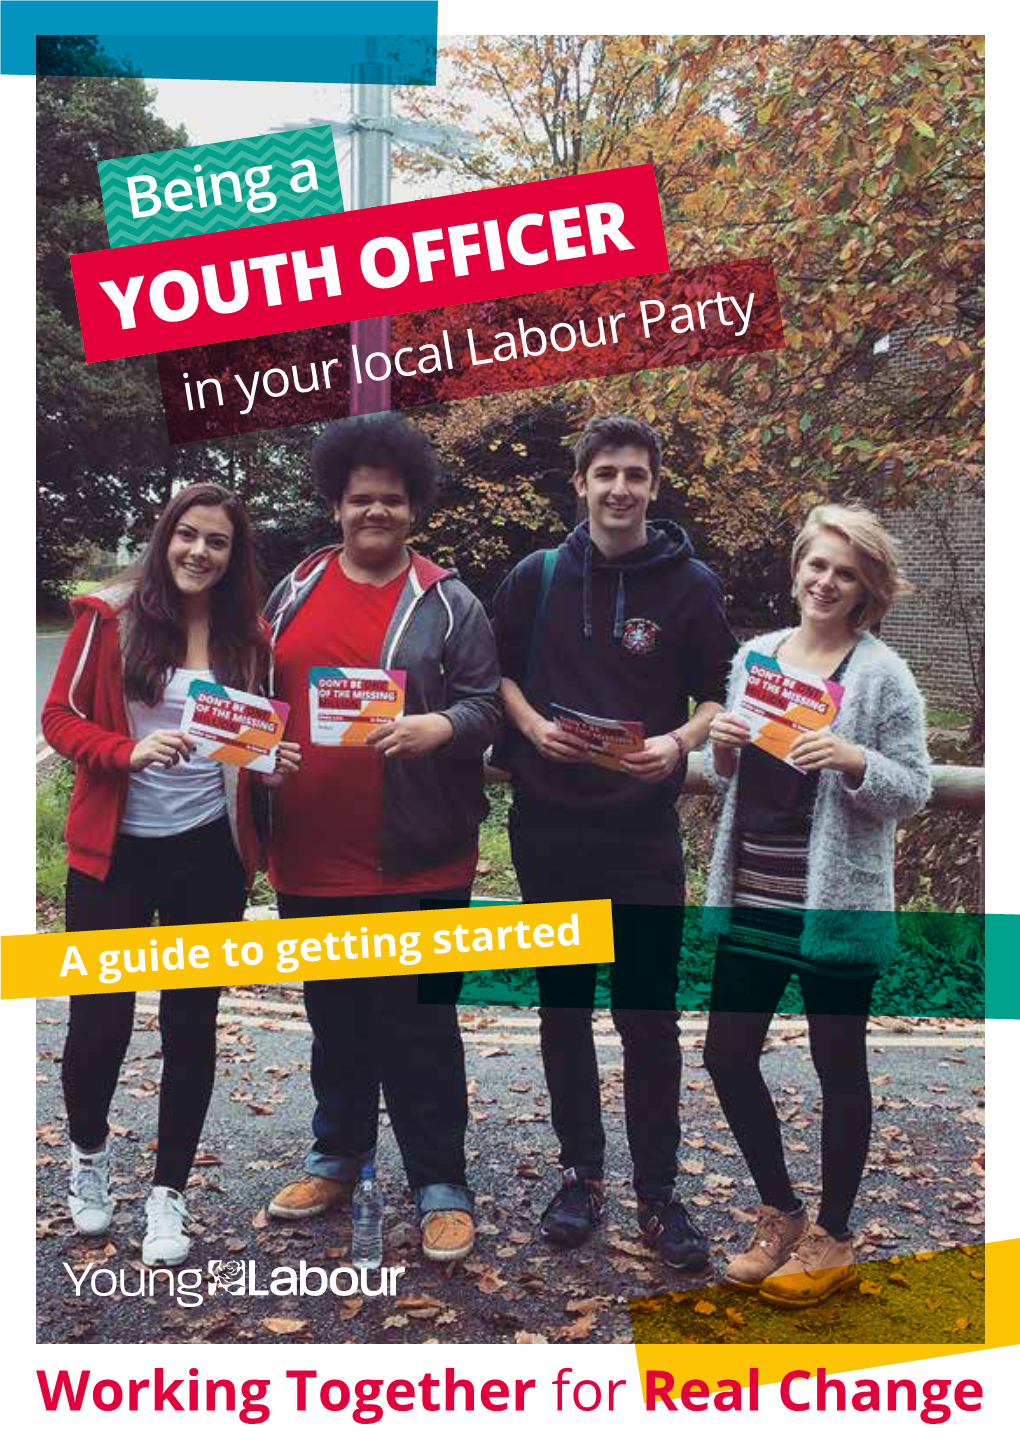 YOUTH OFFICER in Your Local Labour Party